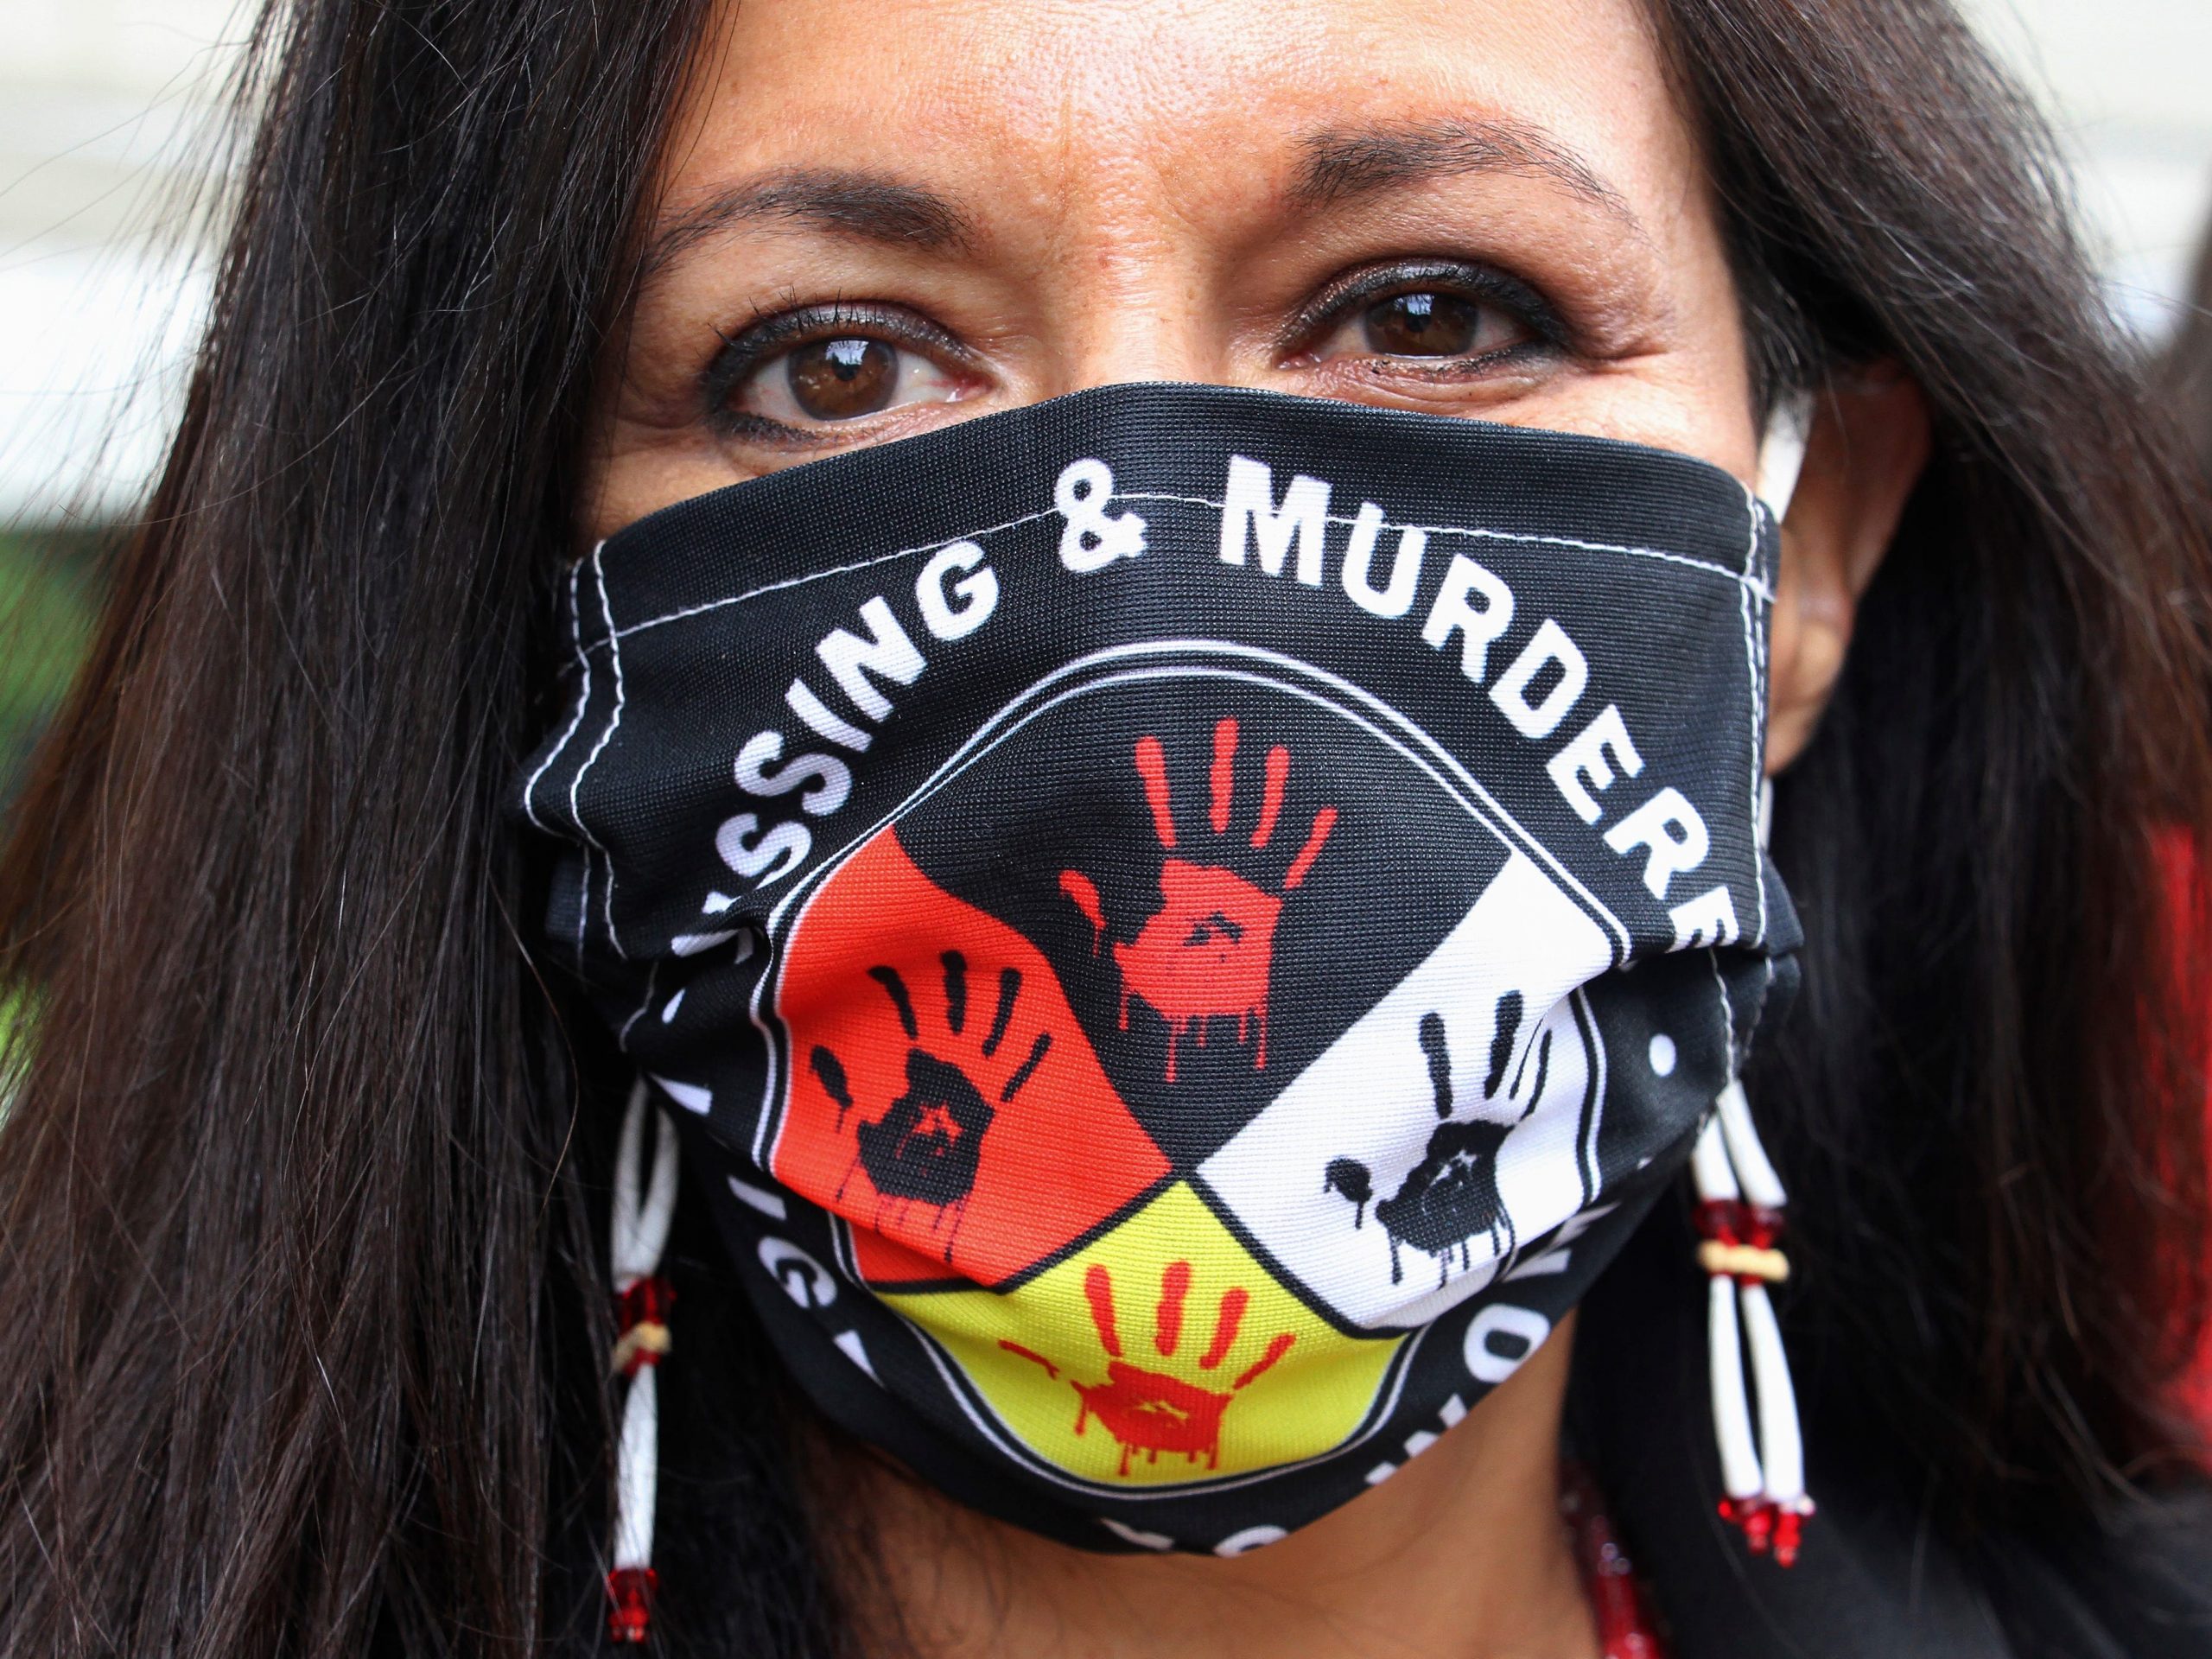 Jeannie Hovland, the deputy assistant secretary for Native American Affairs for the U.S. Department of Health and Human Services, poses with a Missing and Murdered Indigenous Women mask on Aug. 26, 2020.